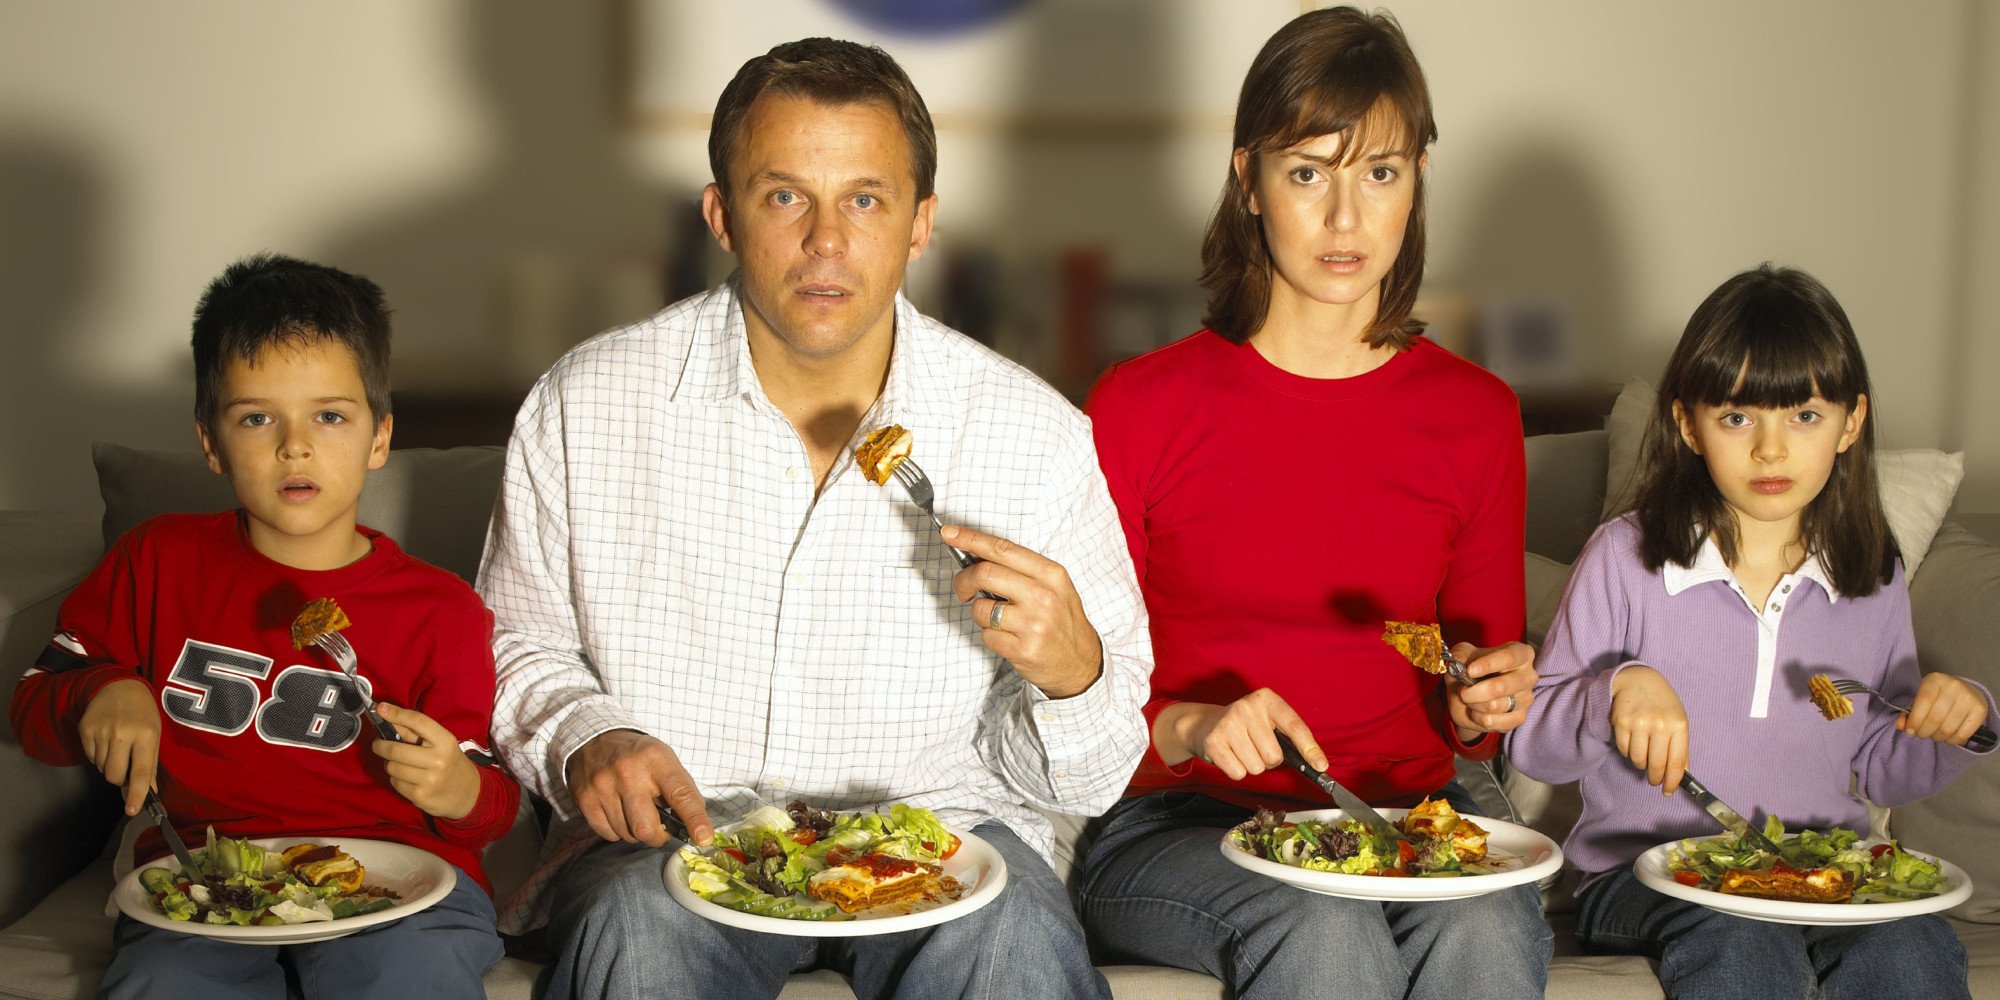 Does Watching TV Influence Eating Habits?